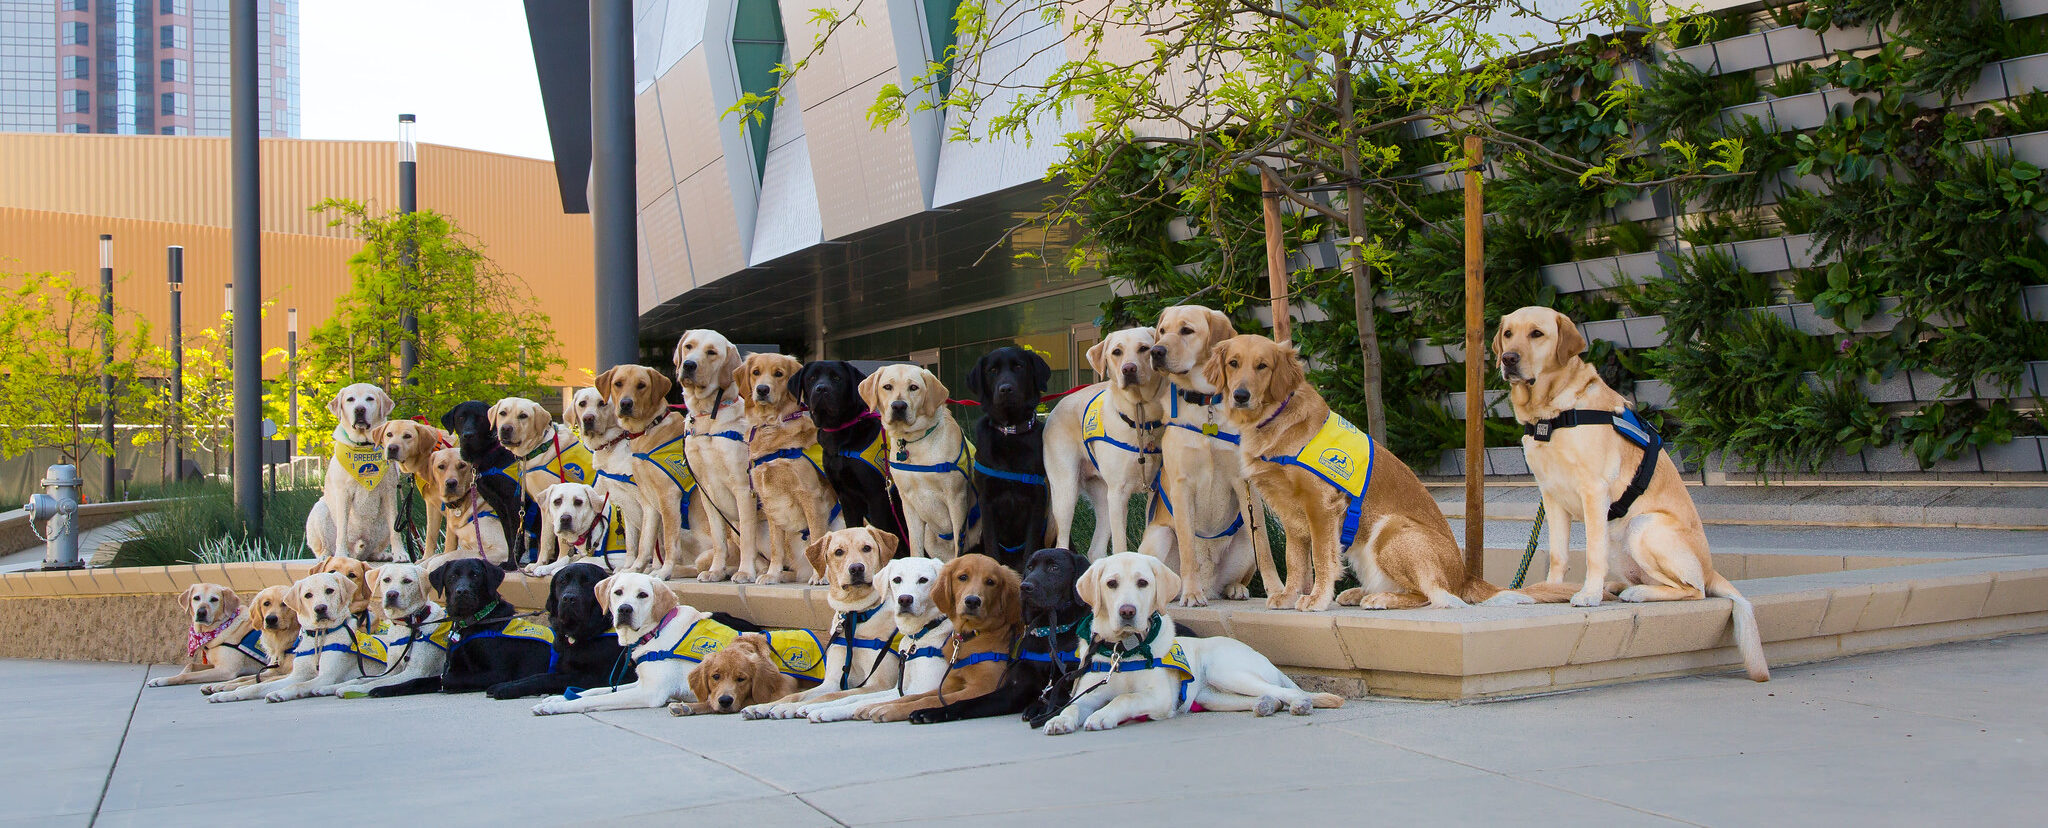 Canine Companions service dogs and puppies sit in front of Sacramento's Golden 1 Center